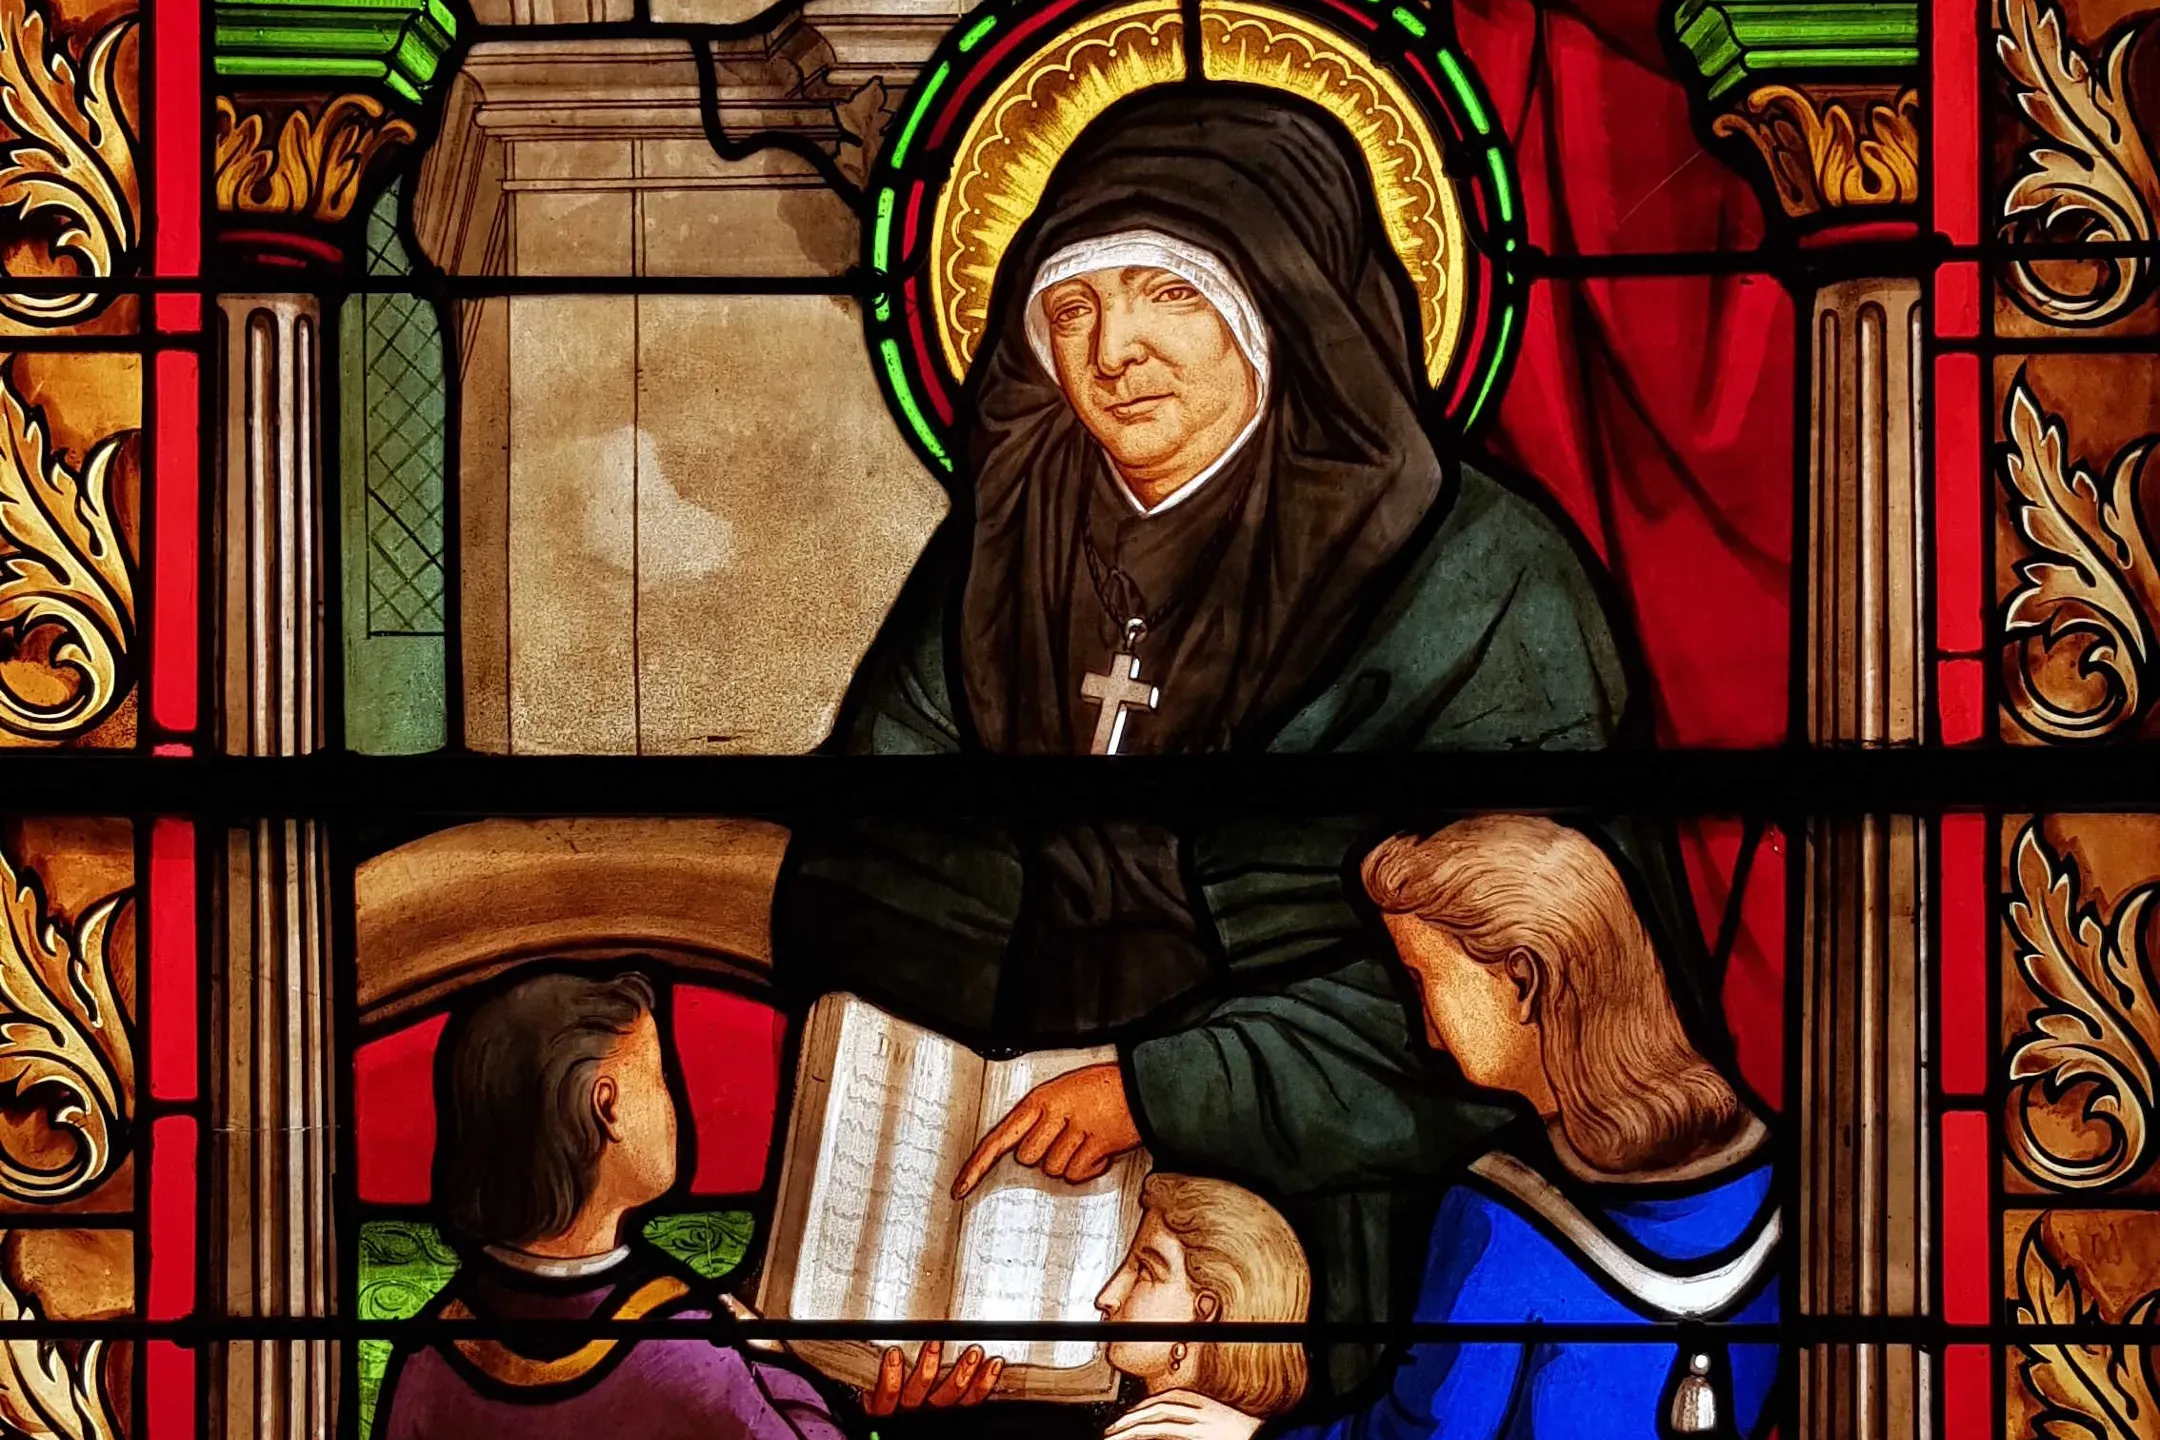 A stained glass window depicting Blessed Marie Rivier in the motherhouse of Sisters of the Presentation of Mary in France. Public domain